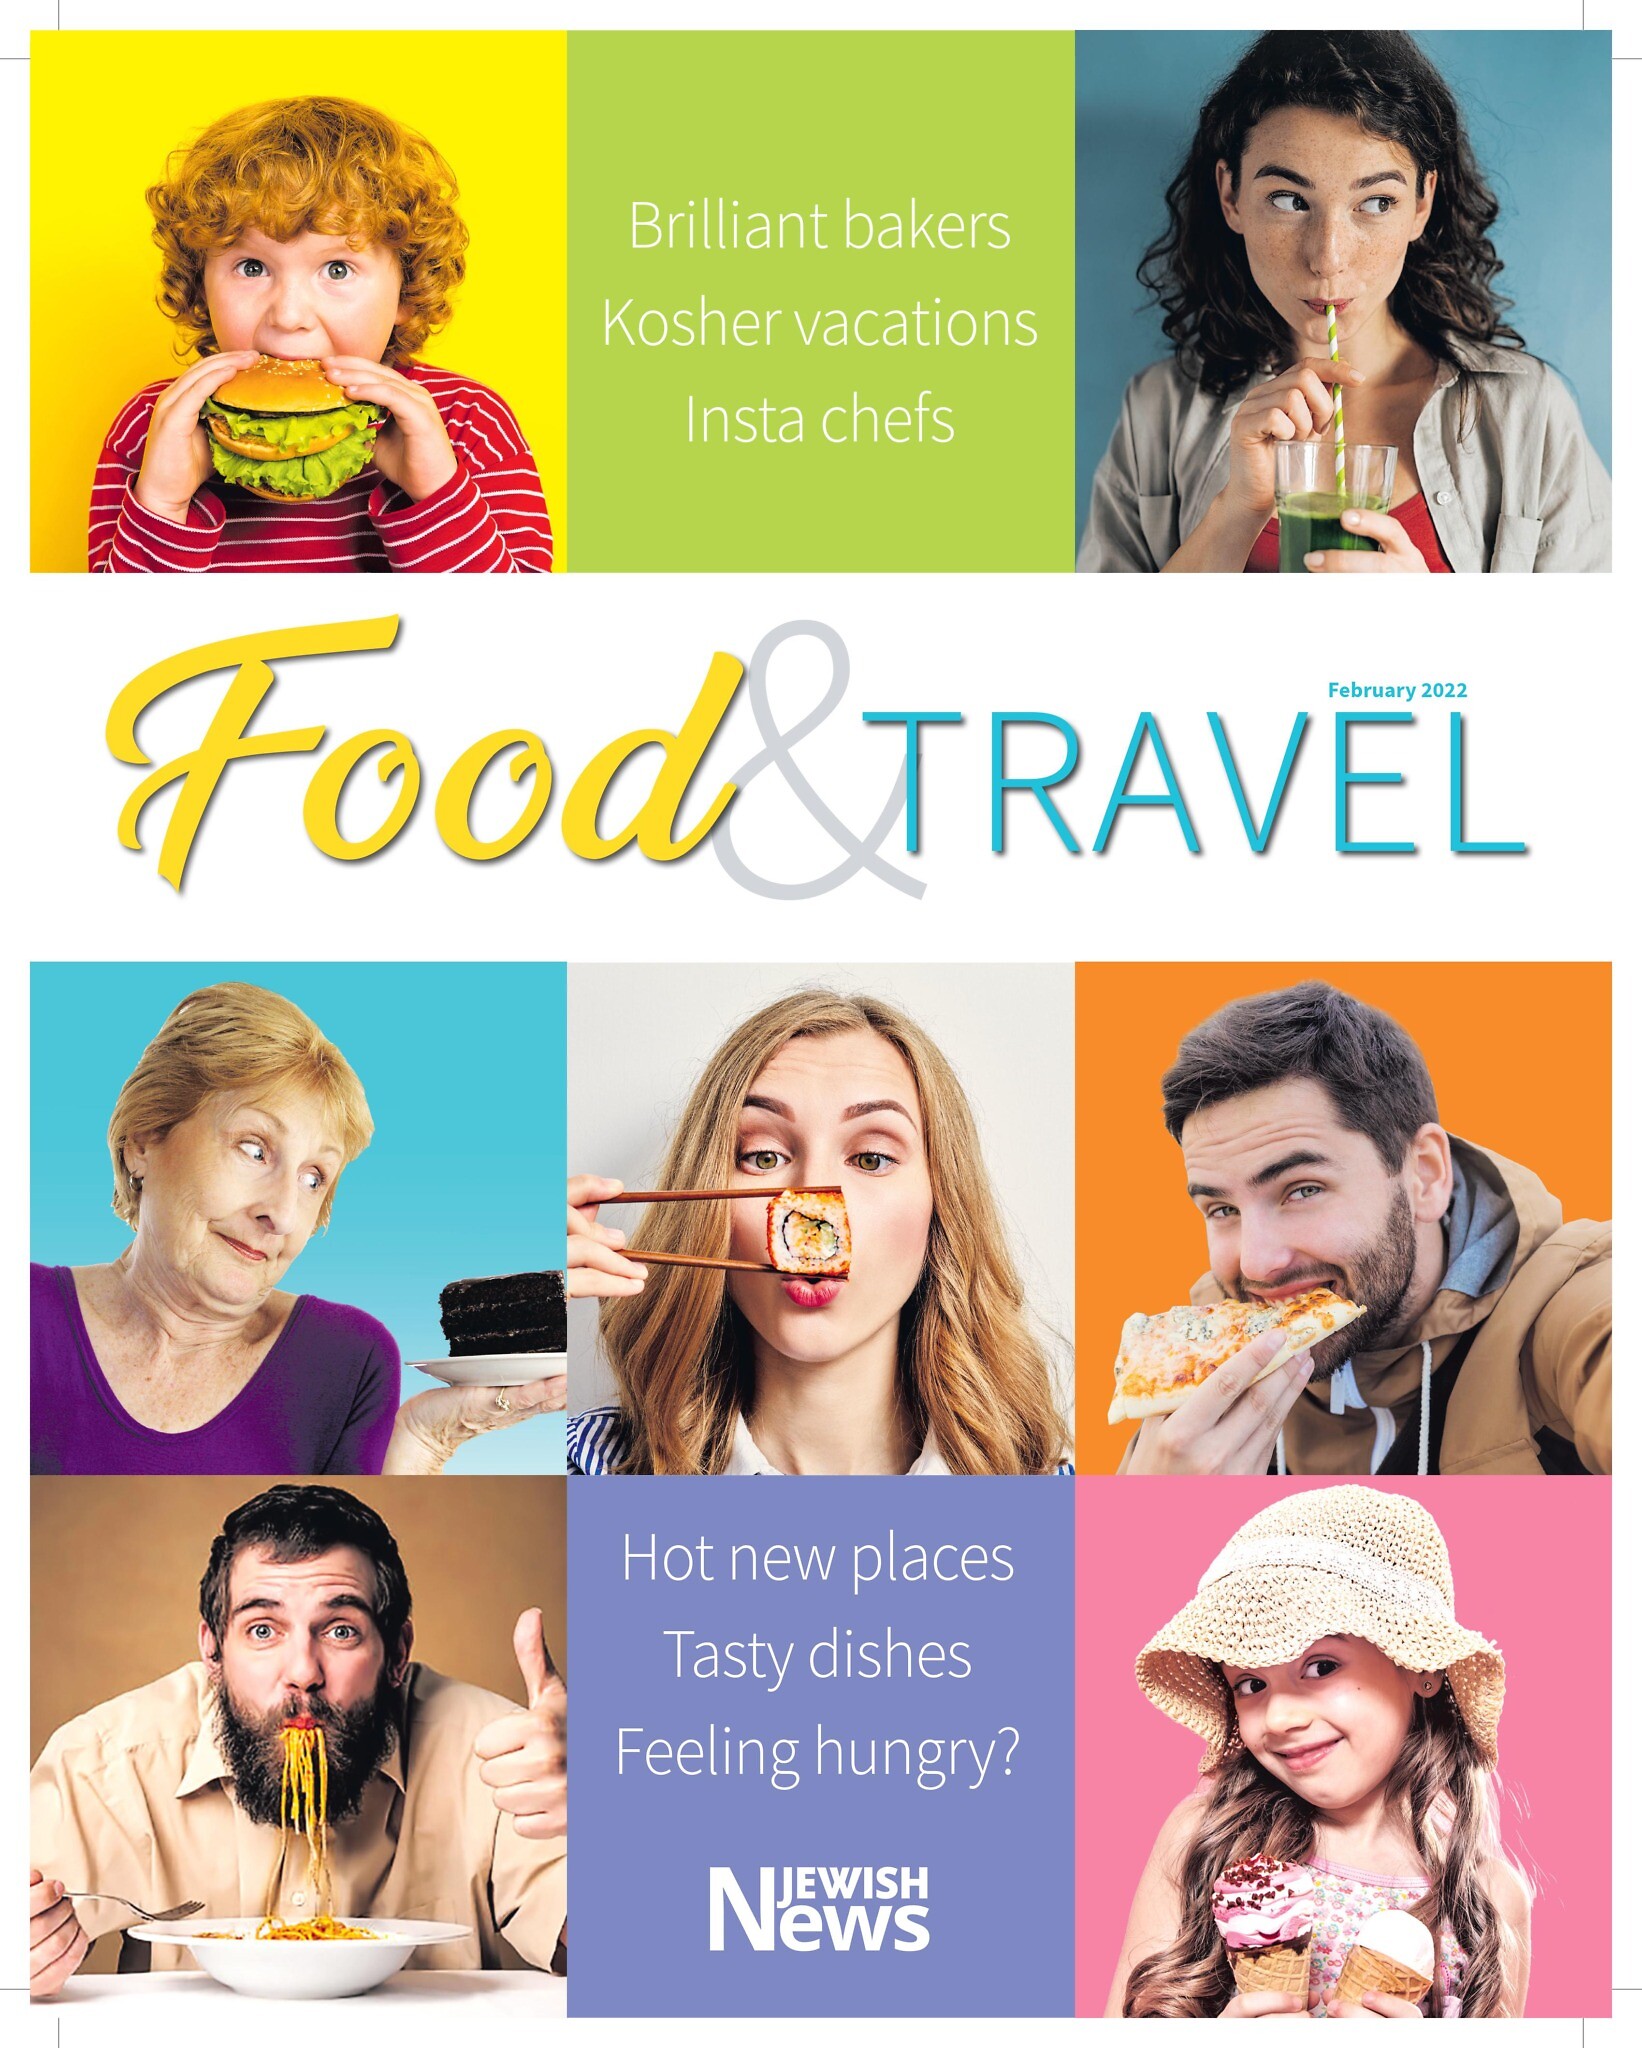 Read the Food and Travel supplement